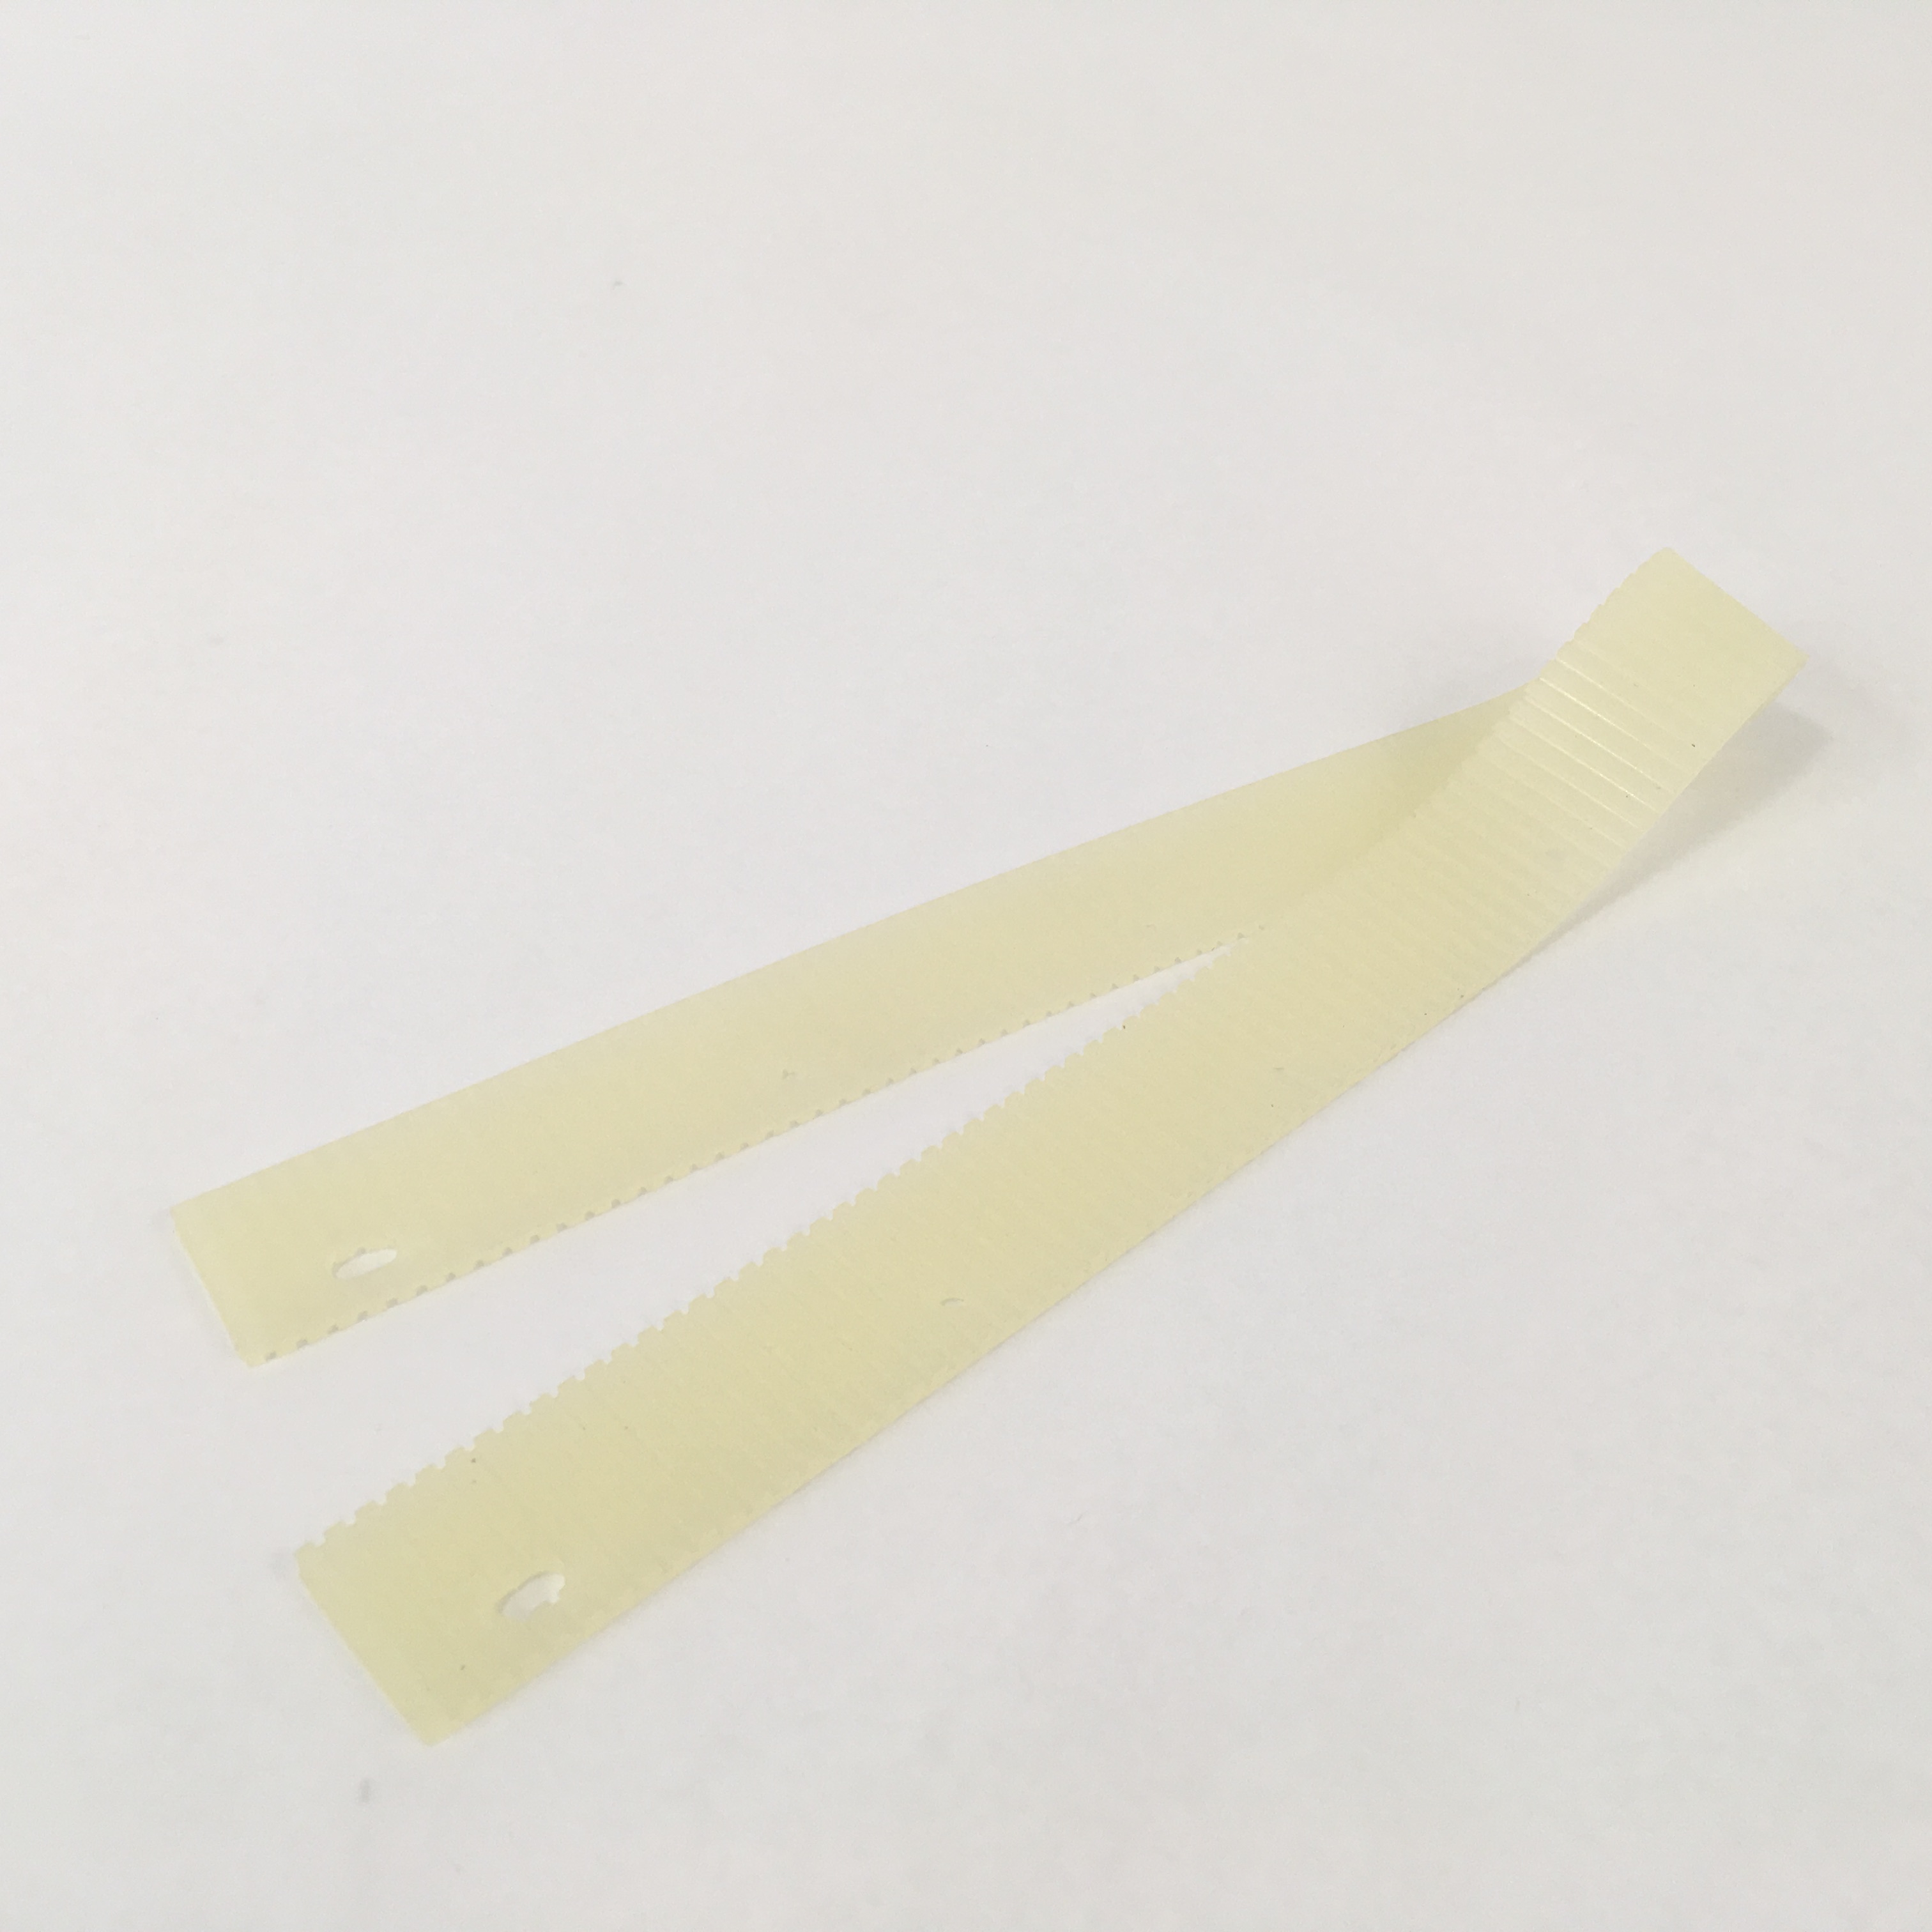 Mosquito Replacement Squeegee
Blade Wet/Dry Vacuum, each (2
required)